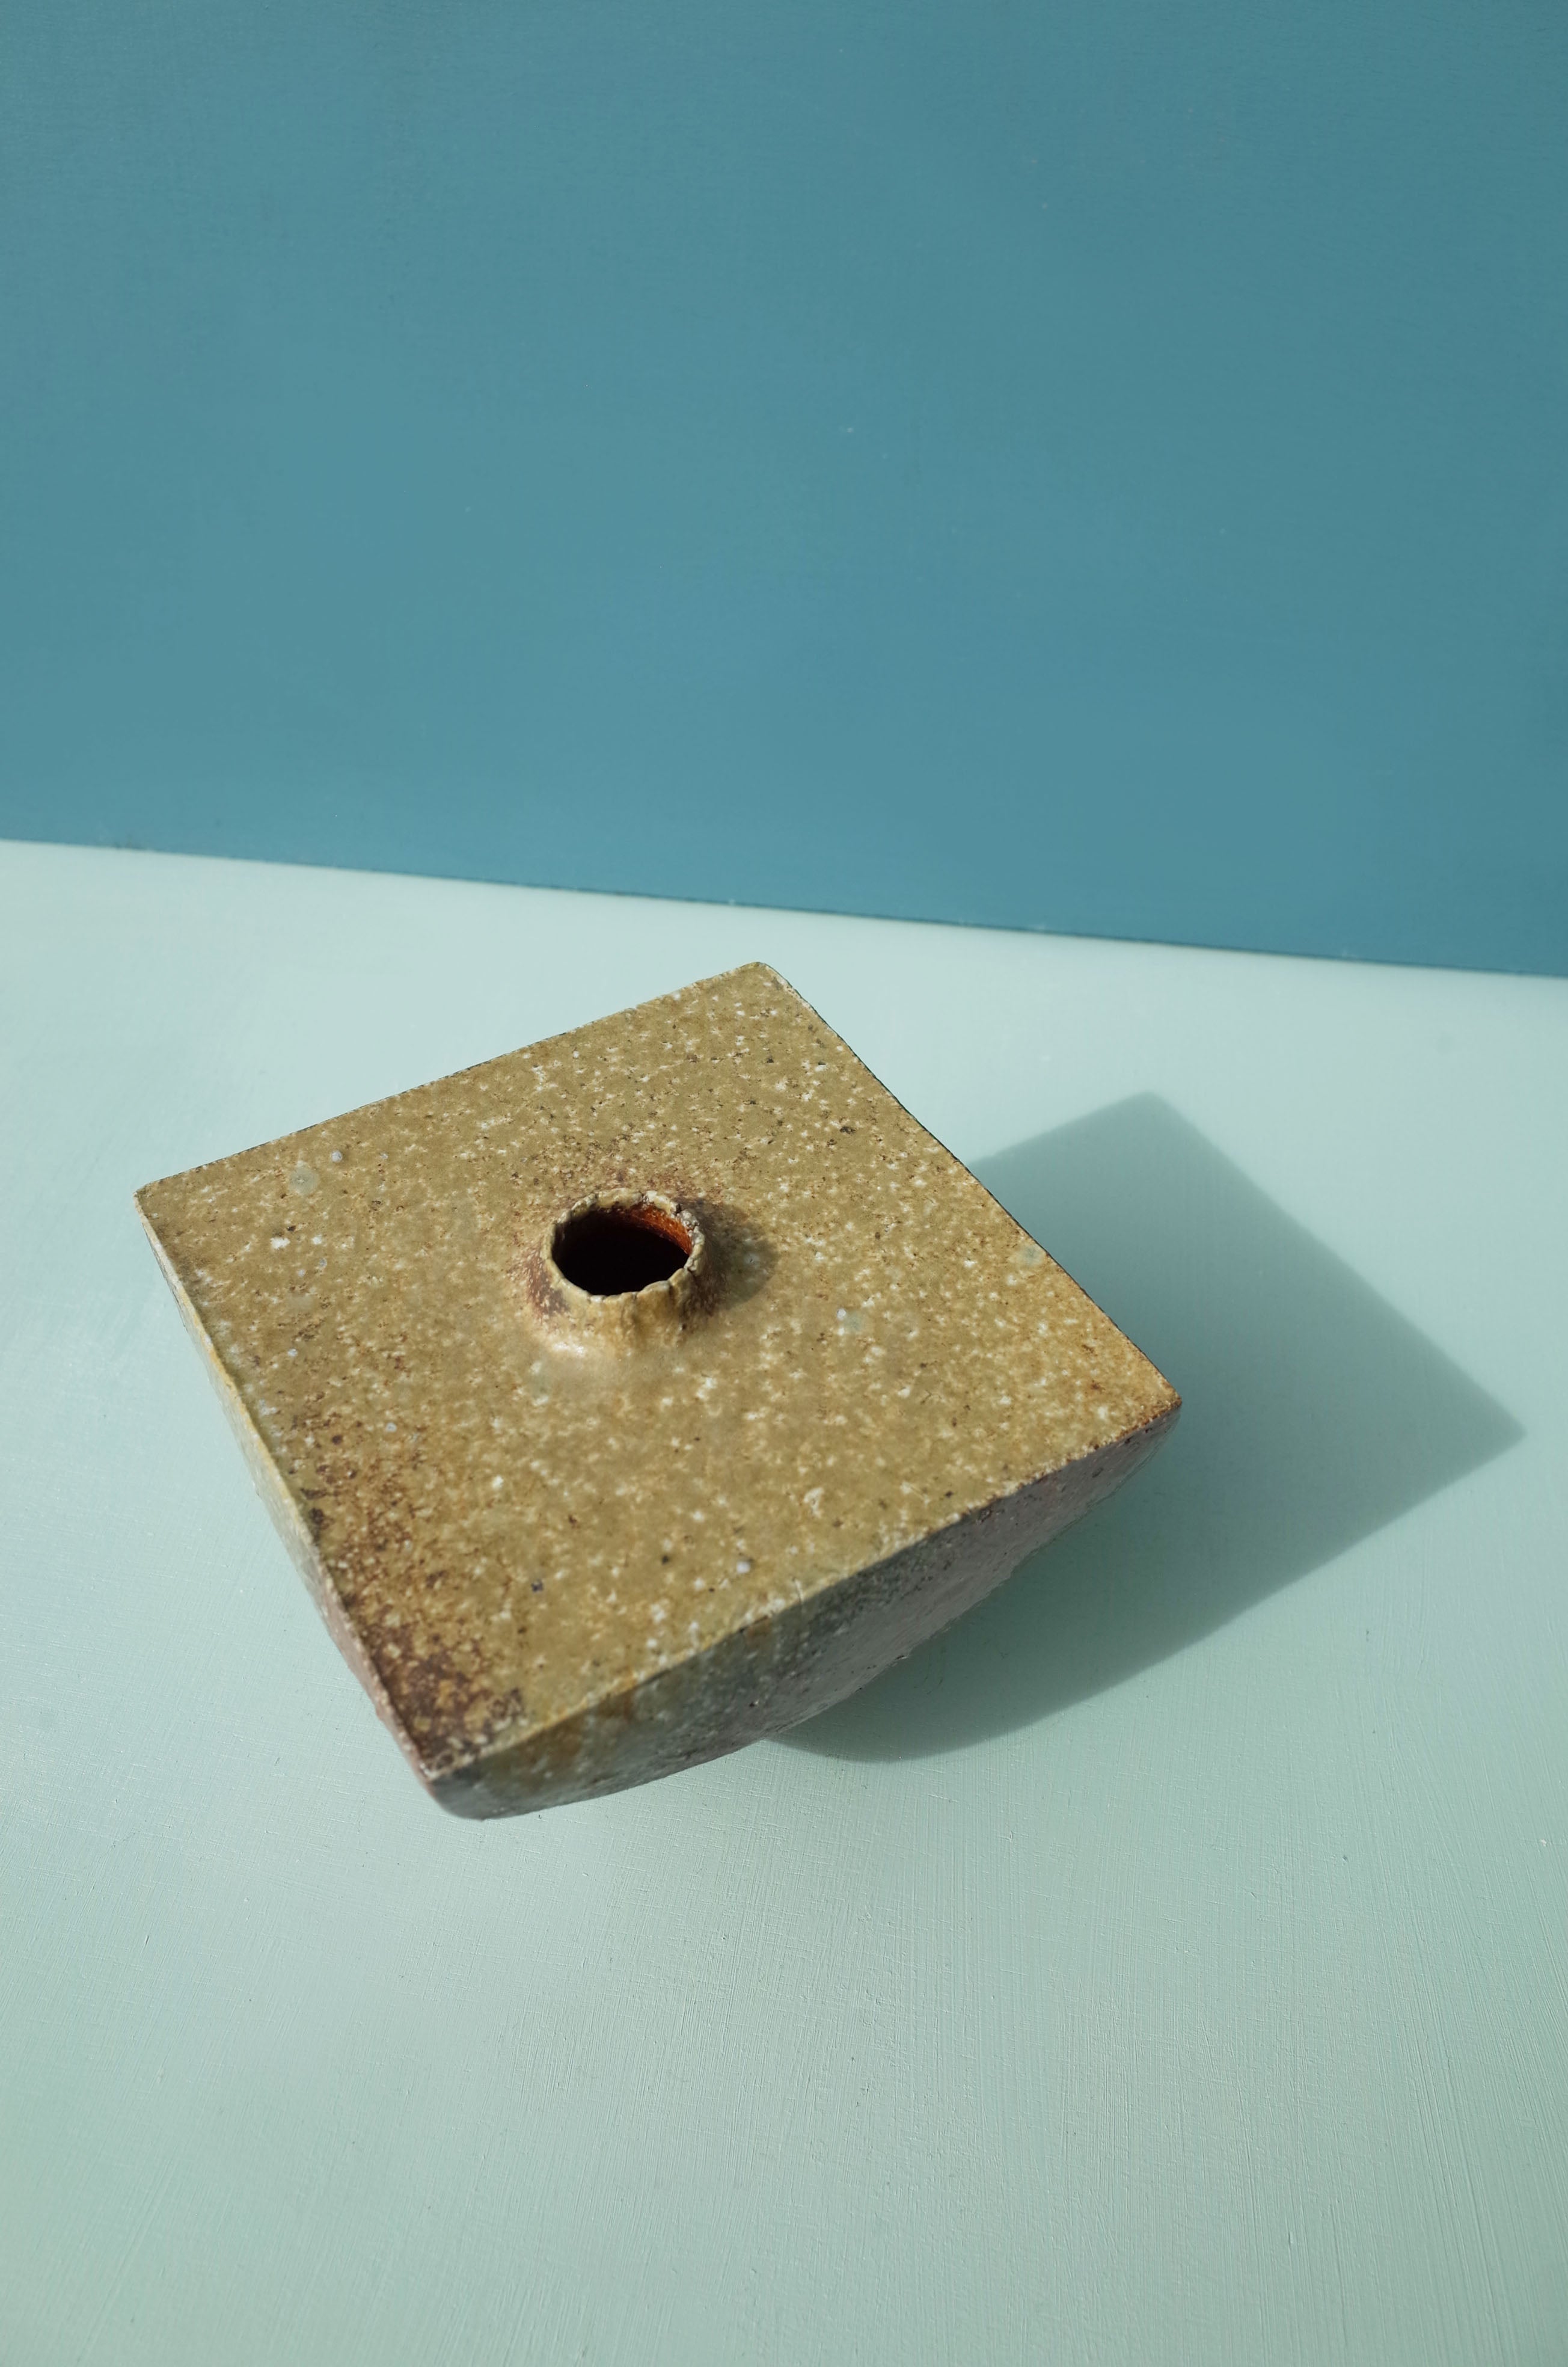 Square Vase With Feet